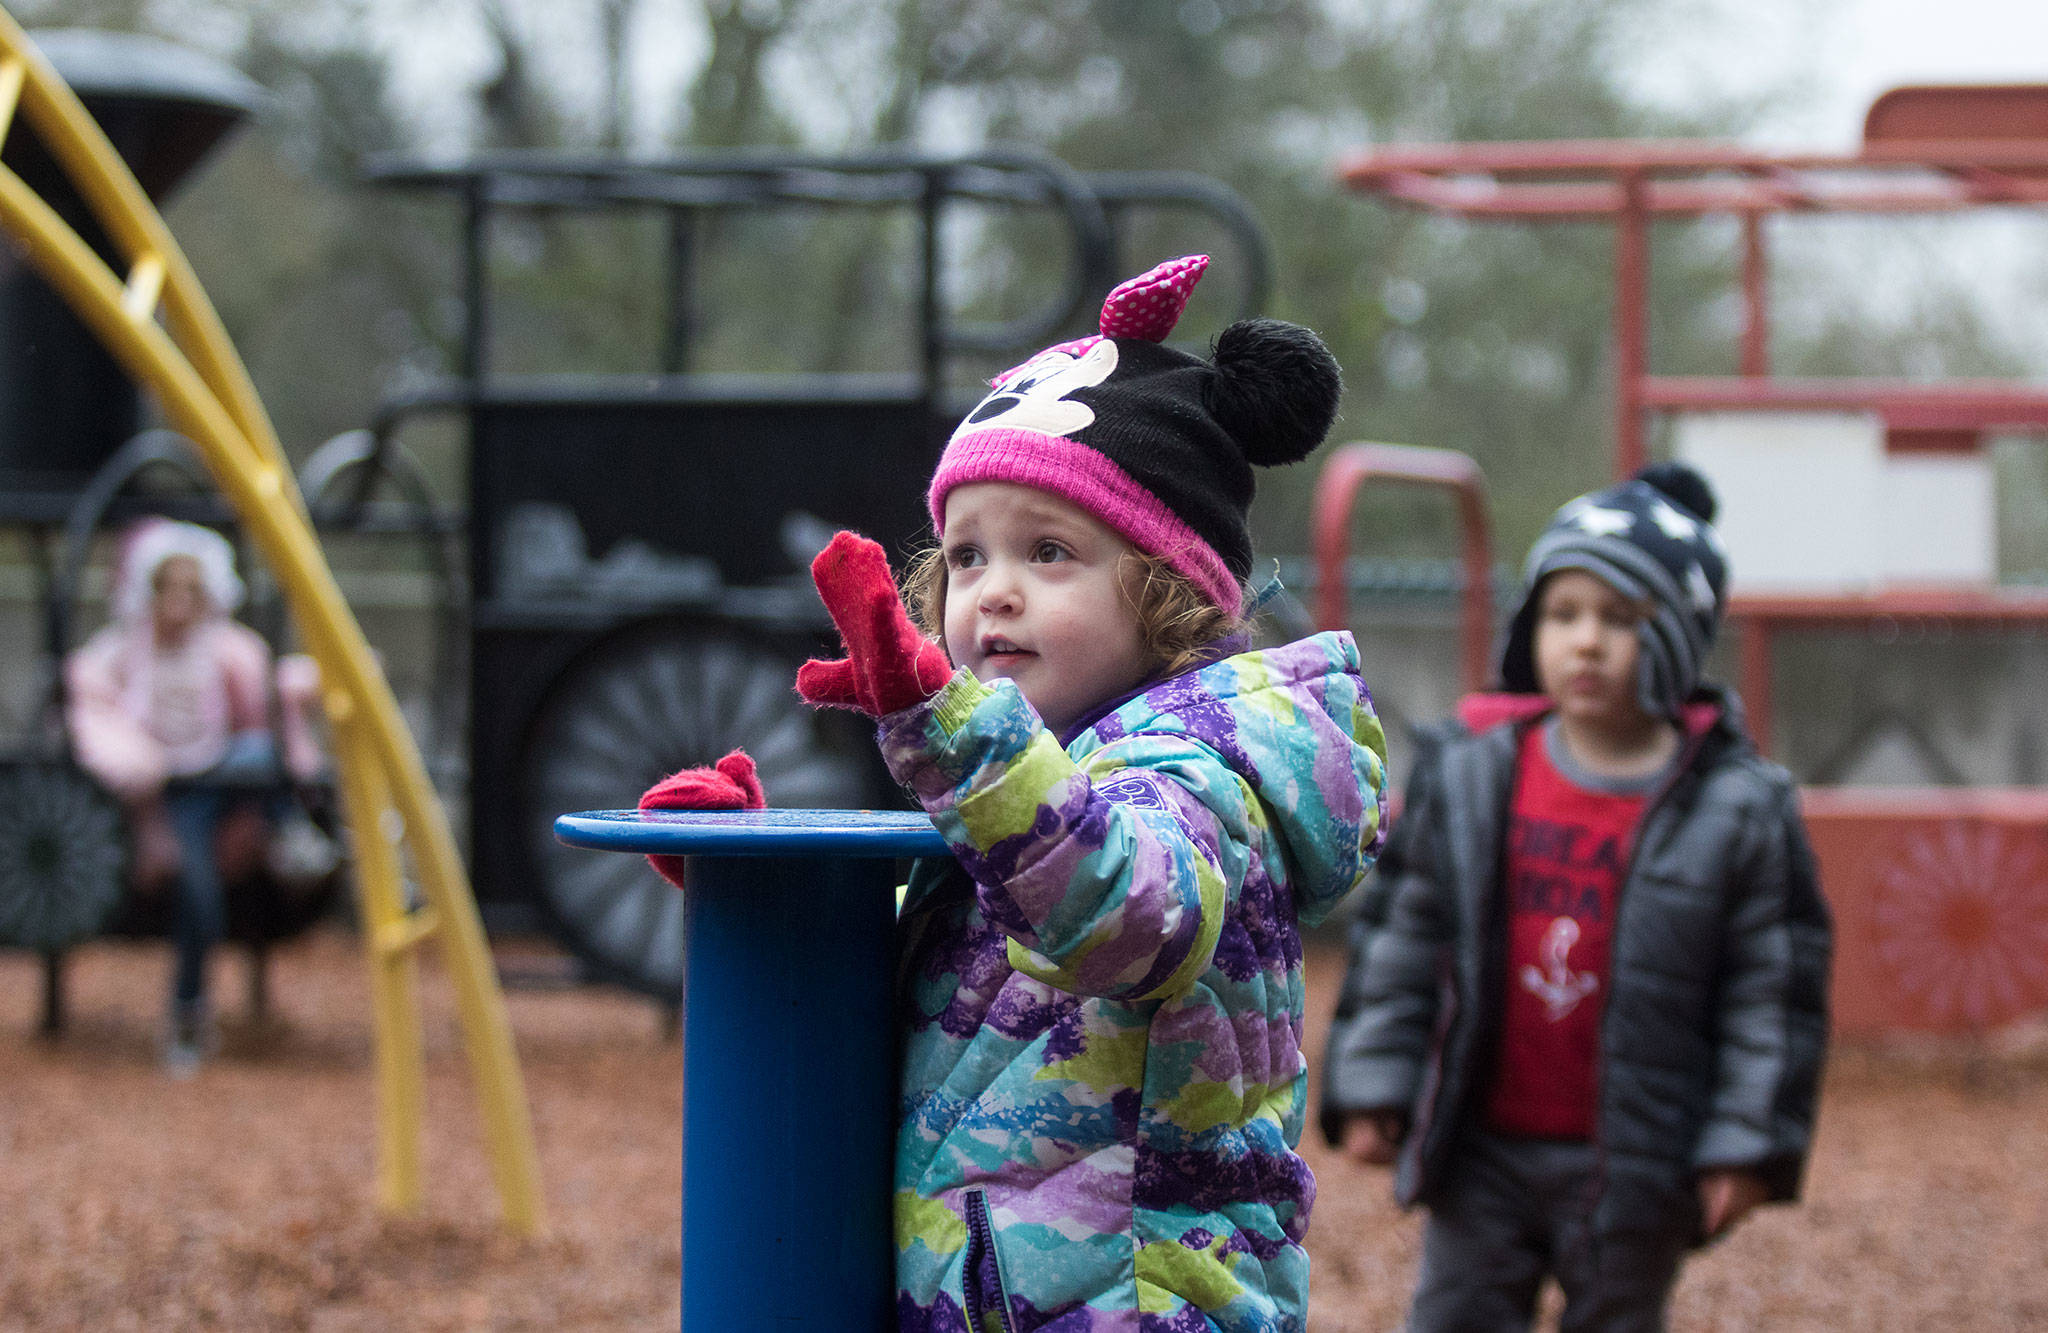 Alison Estes, 3, asks for five more minutes on a spinner at the playground with friends Monday at Forest Park in Everett. The playground is set for a complete overhaul and should be ready in spring 2020. (Andy Bronson / The Herald)